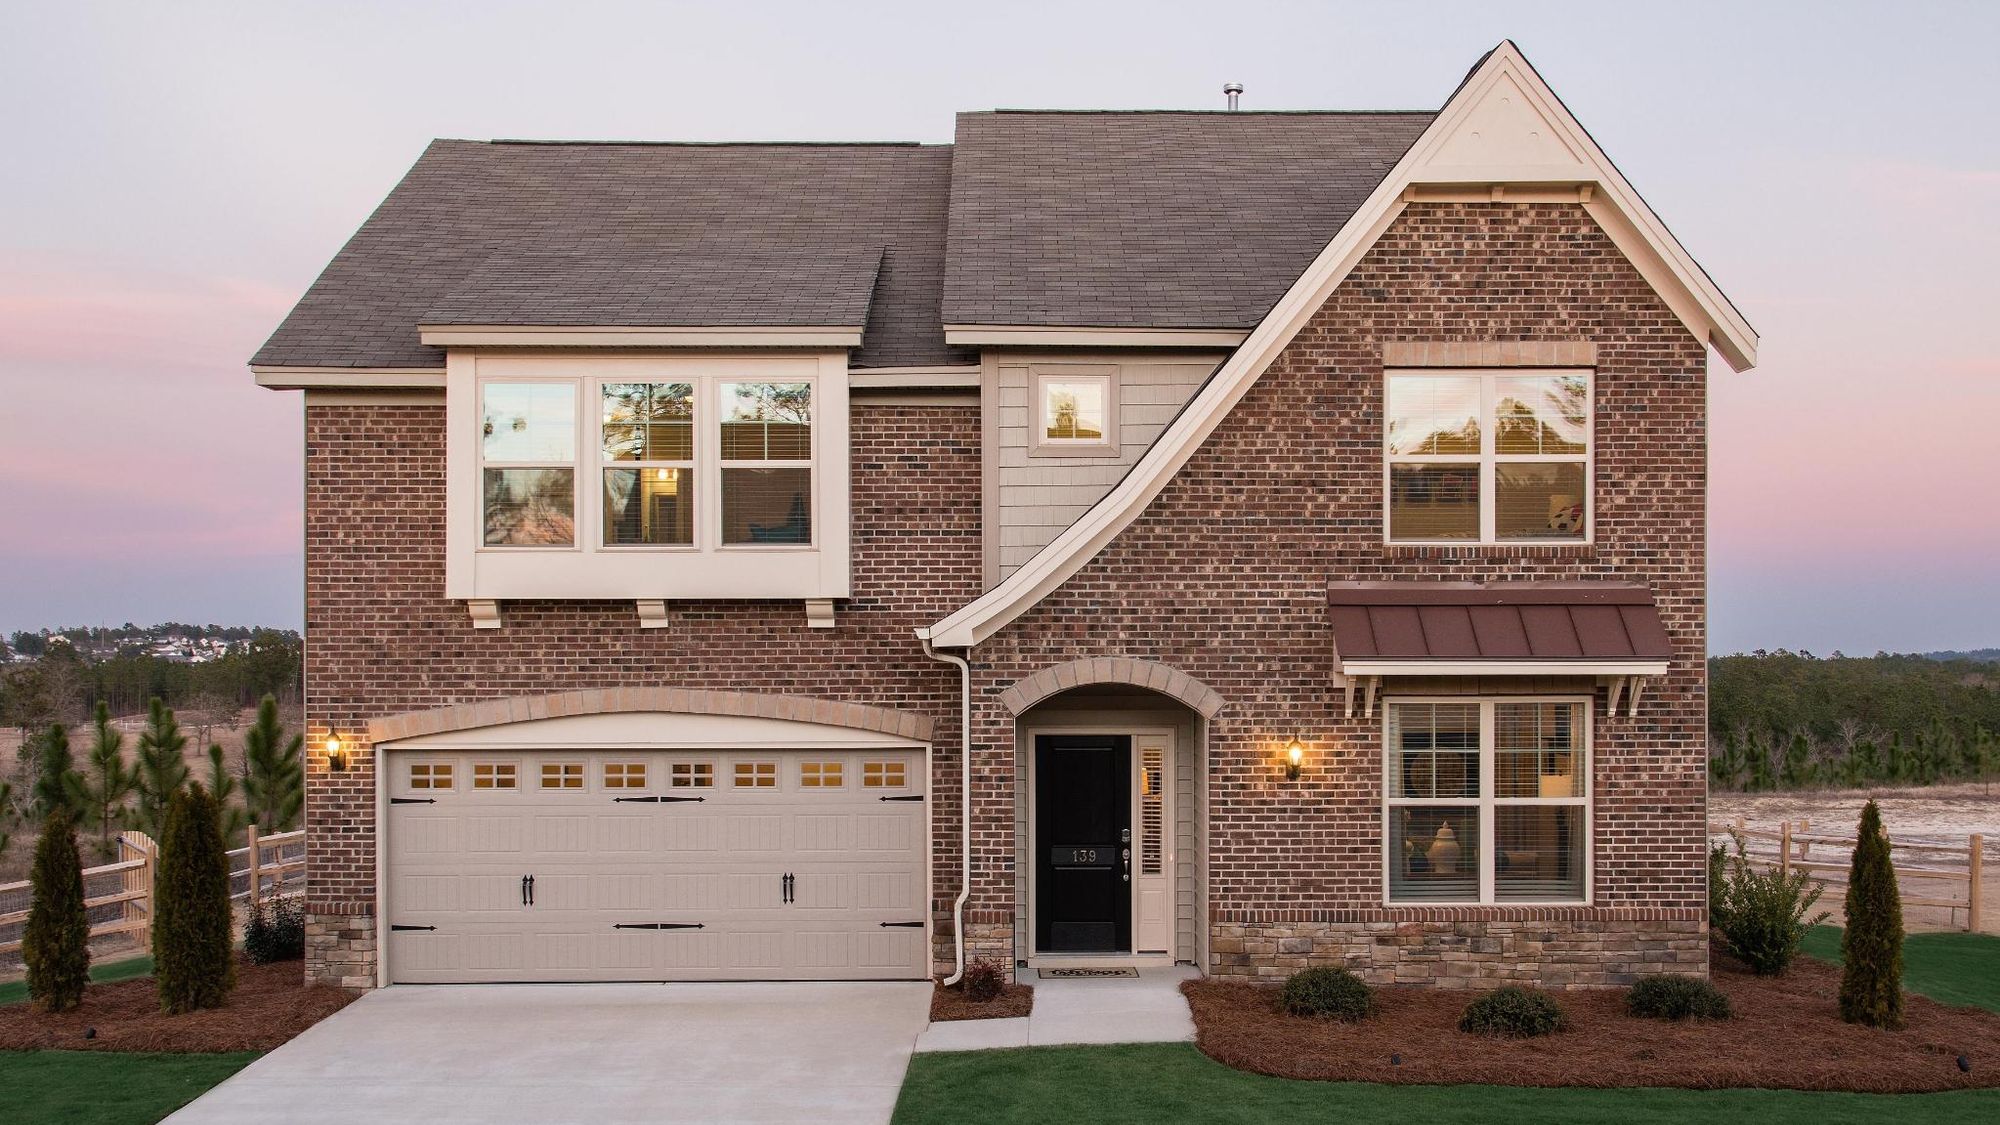 New home for sale in Elgin SC featuring Mungo's Langford Plan